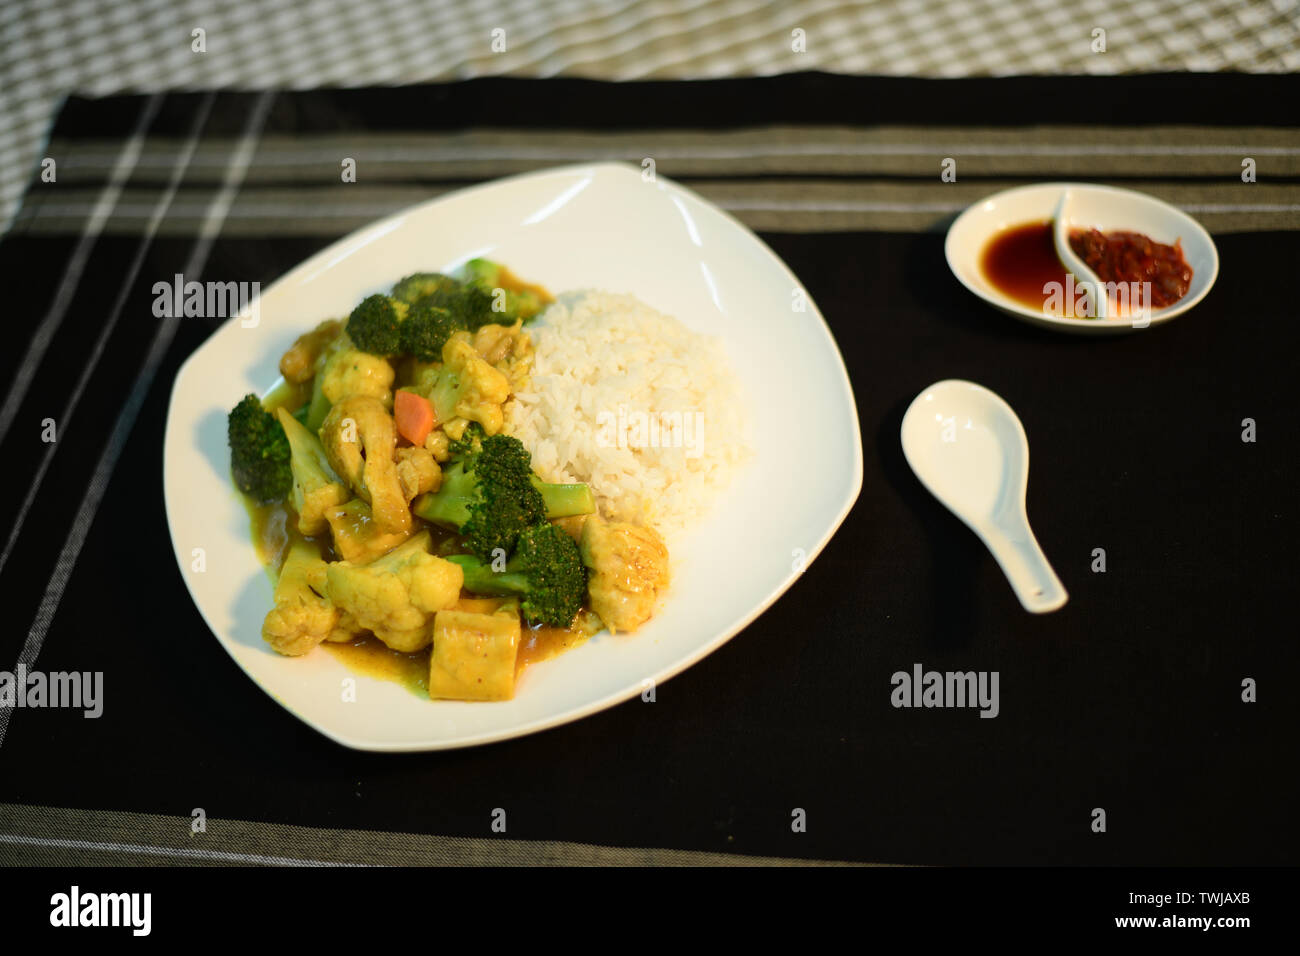 vegetarian curry on rice, setup nicely on a table ready to serve Stock Photo